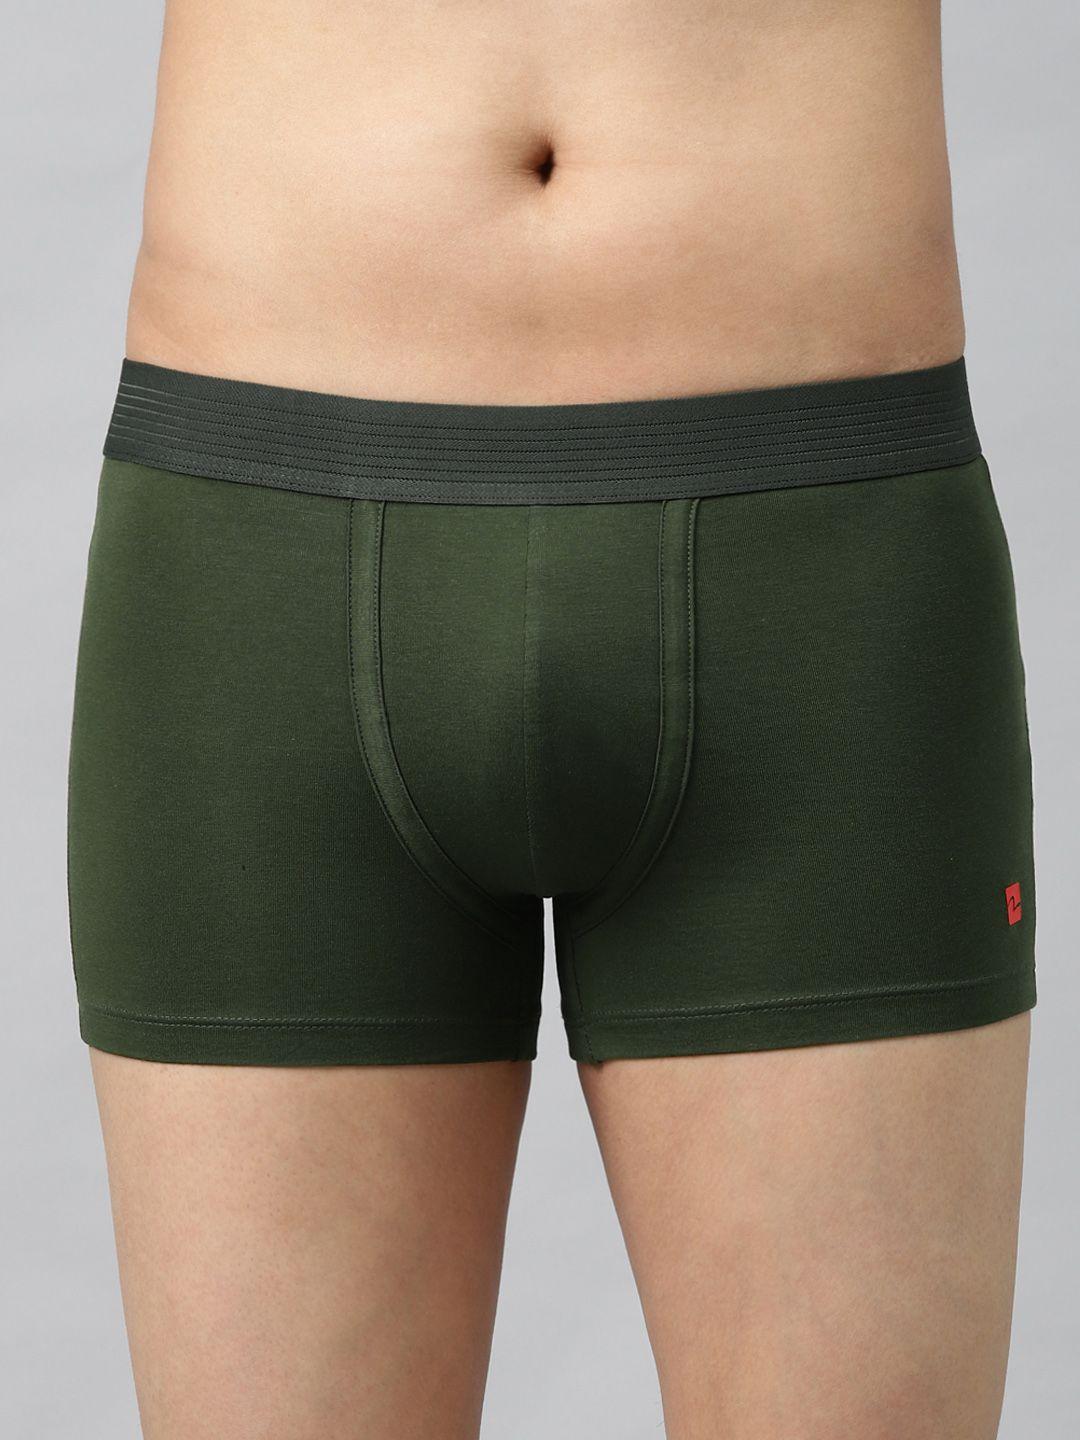 underjeans by spykar olive green solid trunk 8907966458536